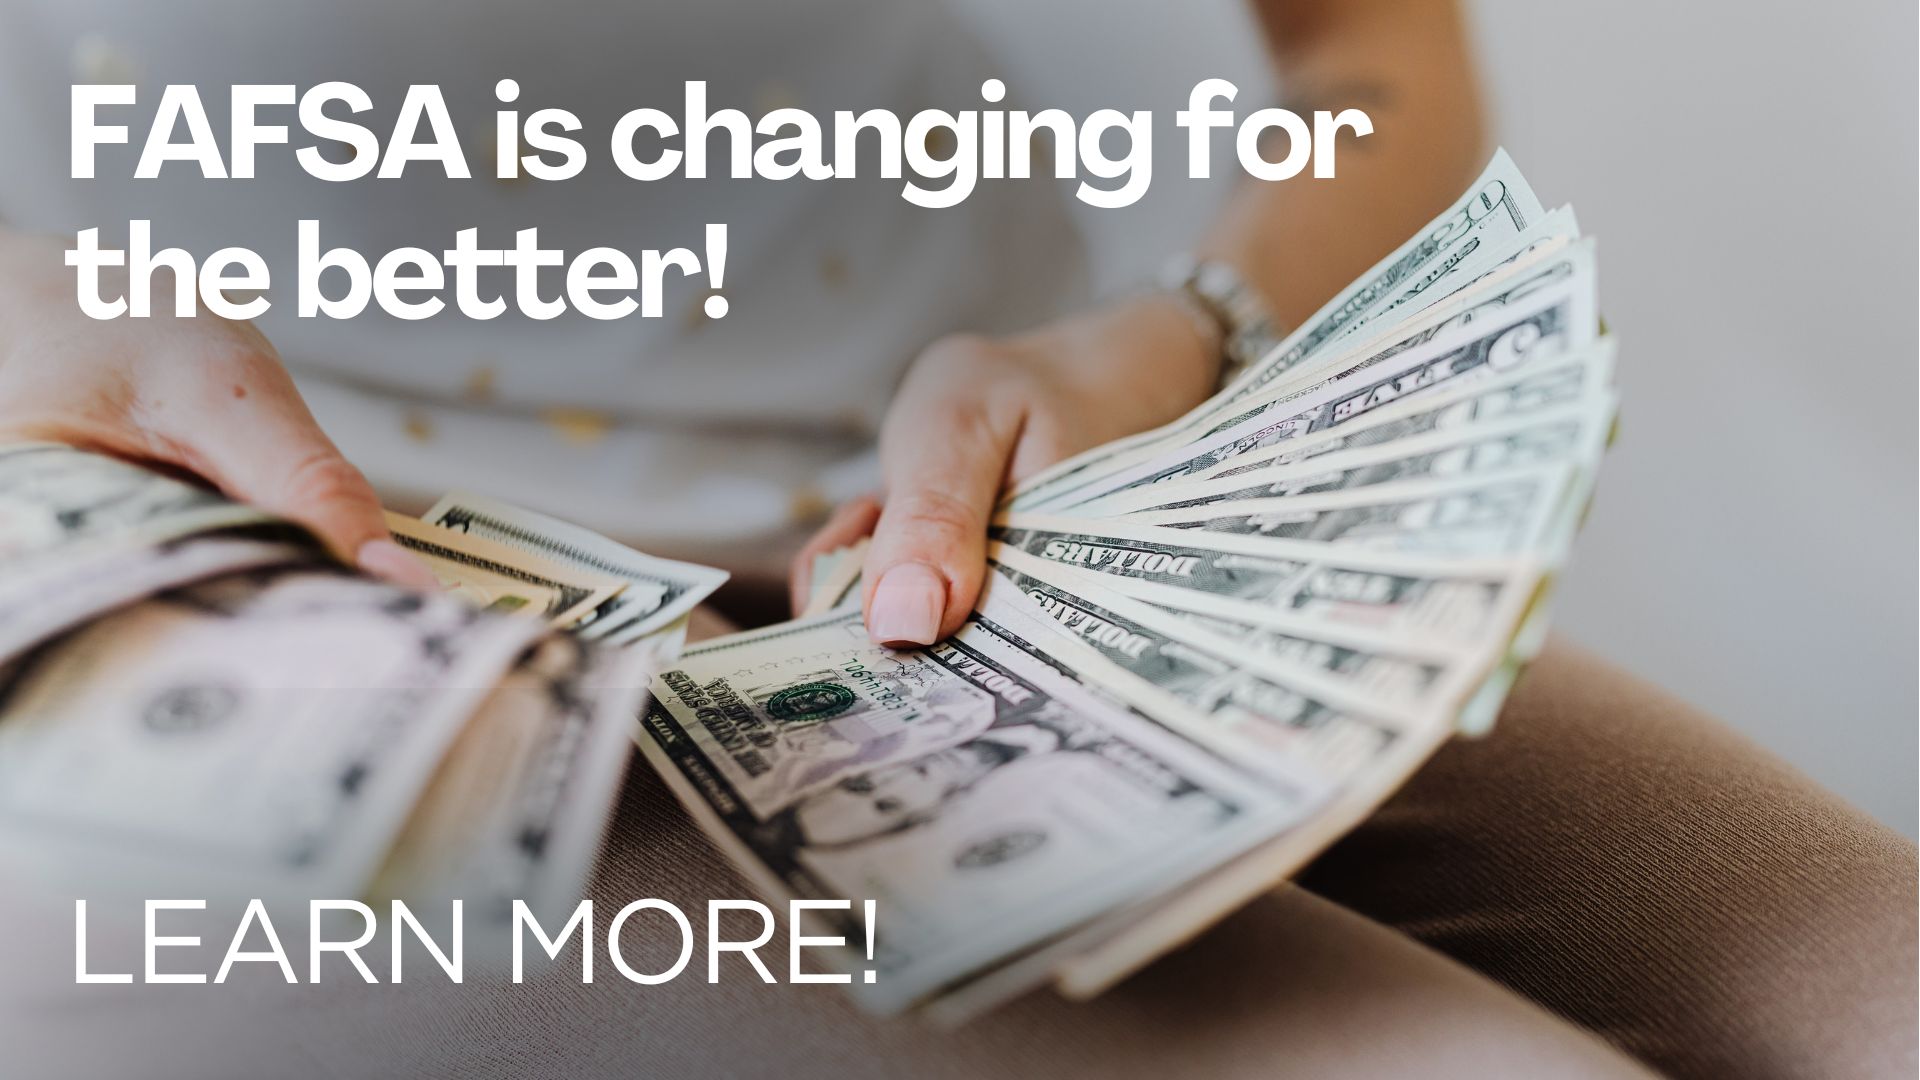 FAFSA is changing for the better! Learn more!